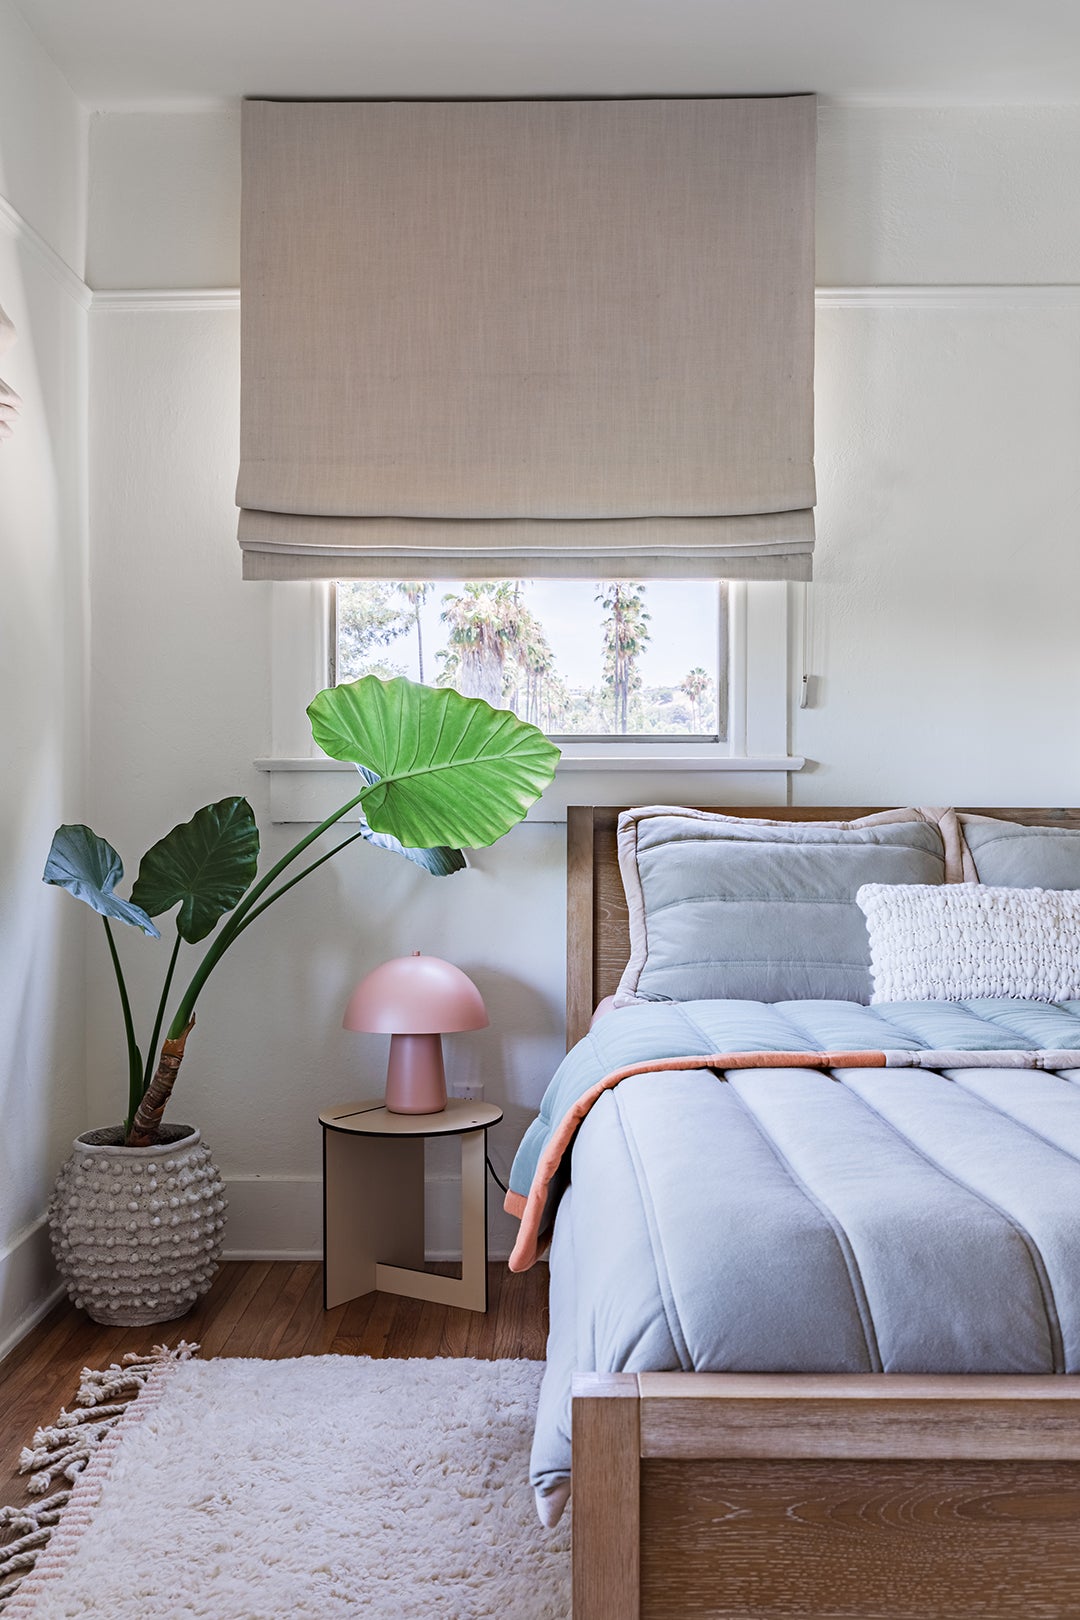 Guest bedroom with plant and mushroom lamp